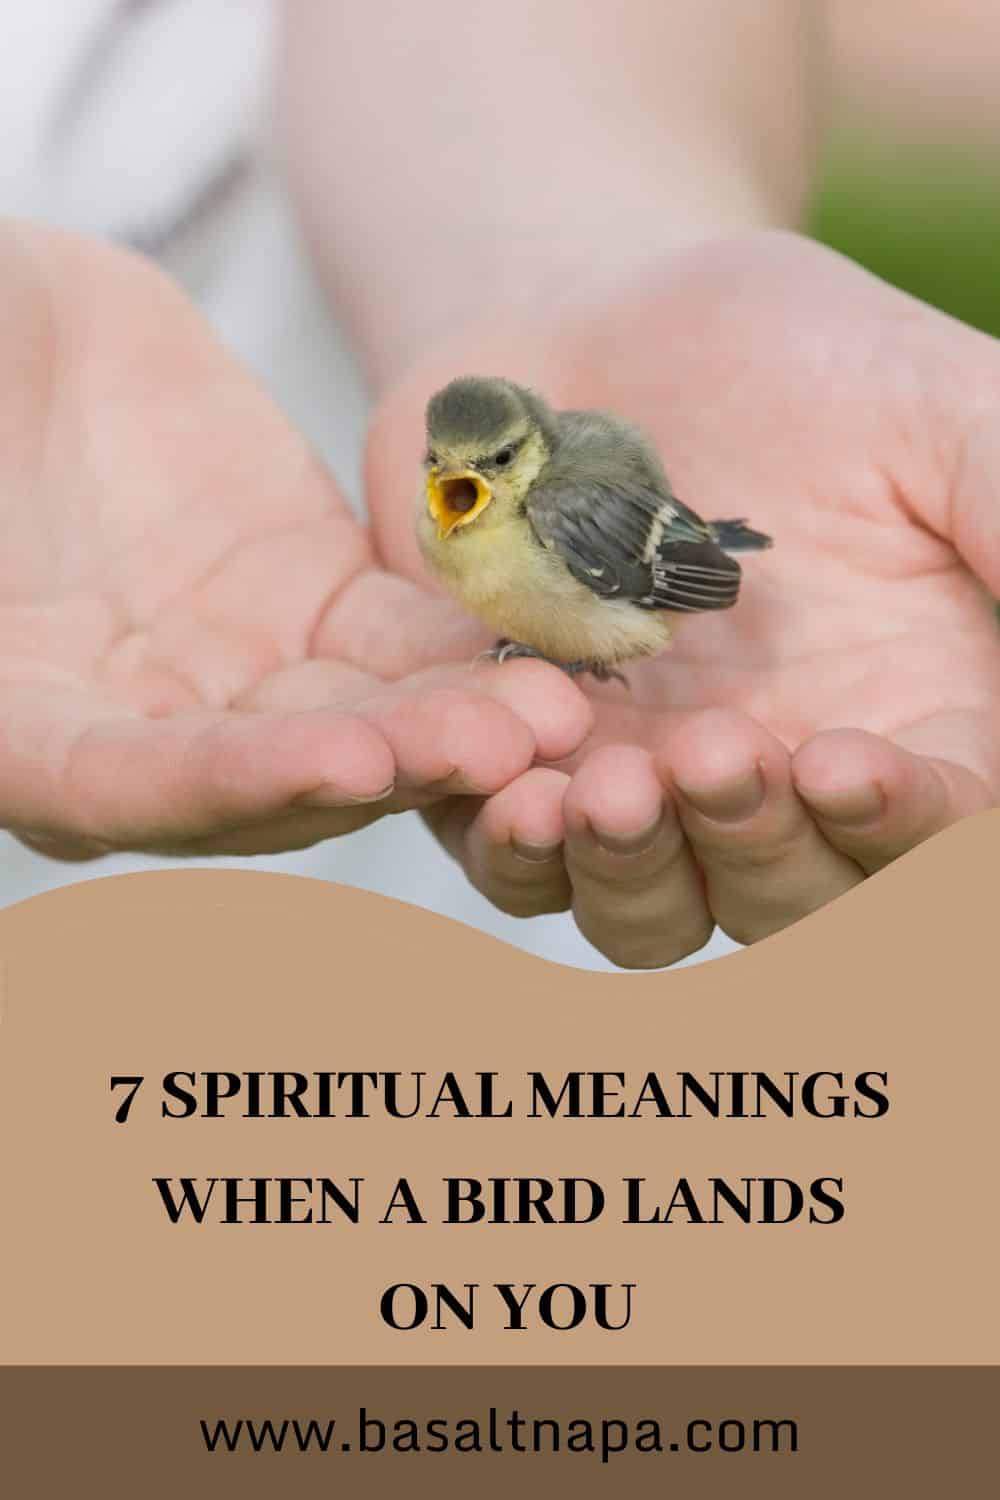 Spiritual Meaning of A Bird Lands on You